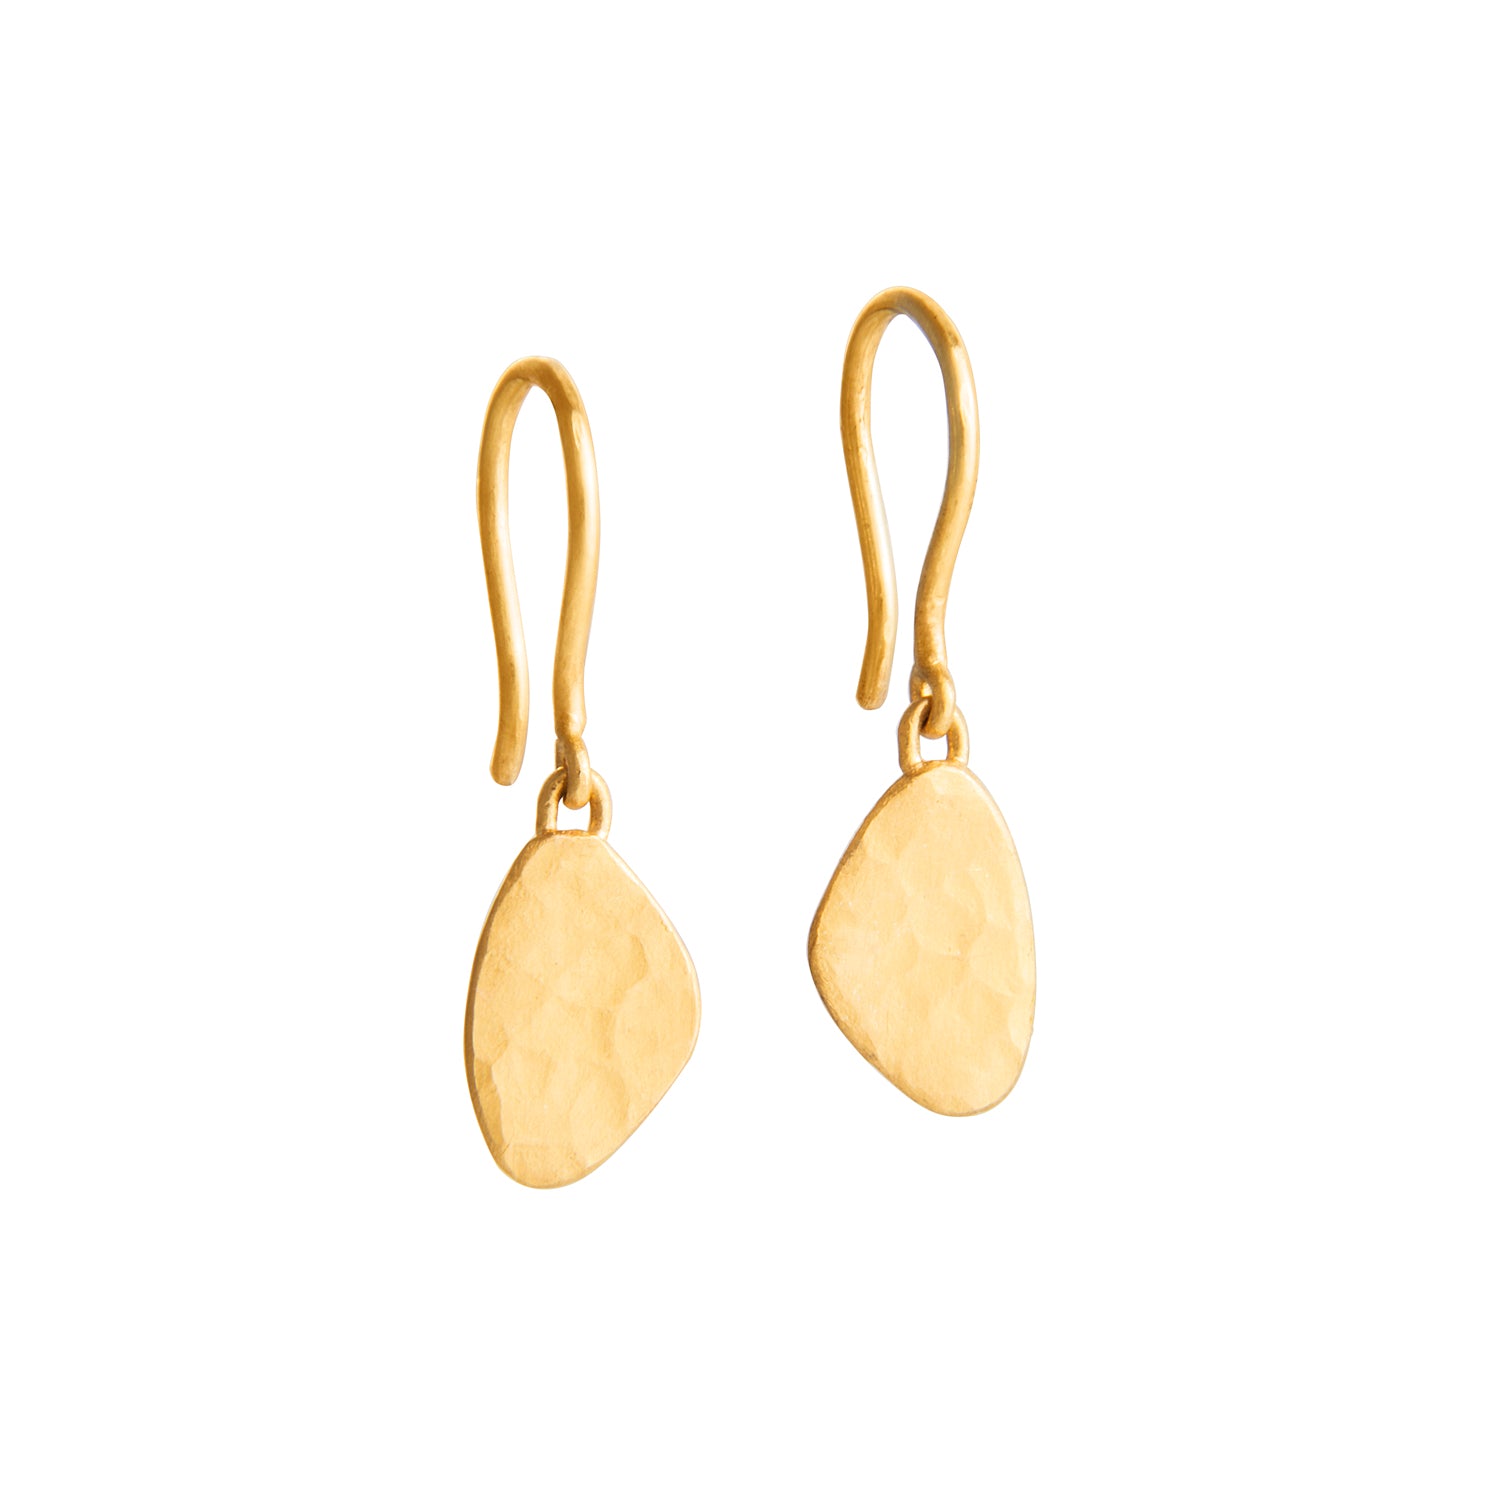 Buy Yellow Gold Earrings for Women by Whp Jewellers Online | Ajio.com